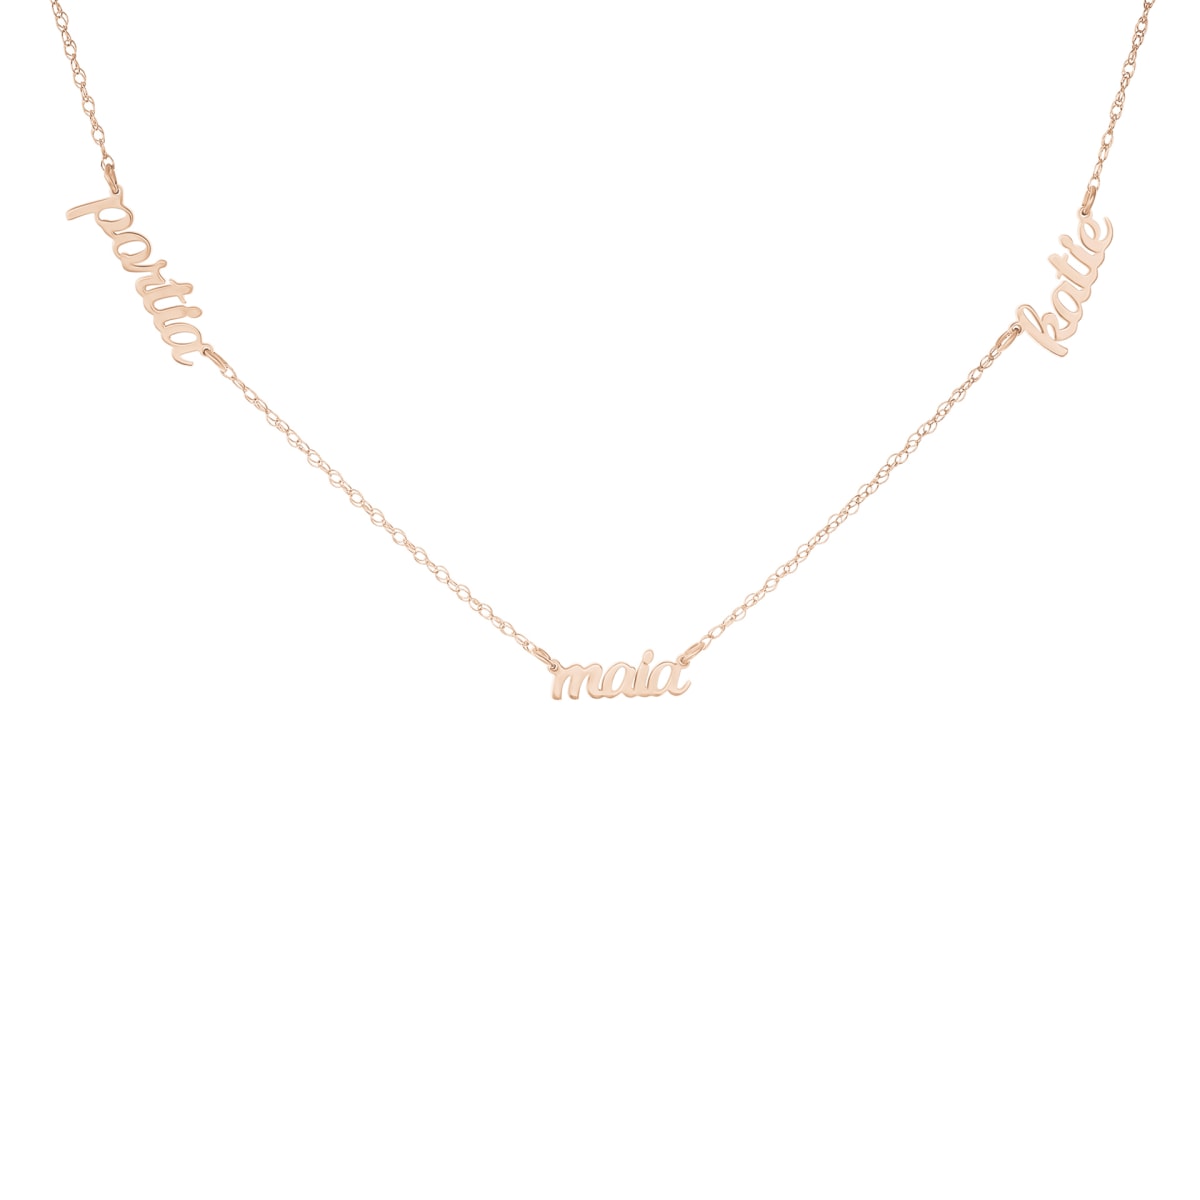 Best Mother's Day Necklaces | 2021 Guide | POPSUGAR Fashion